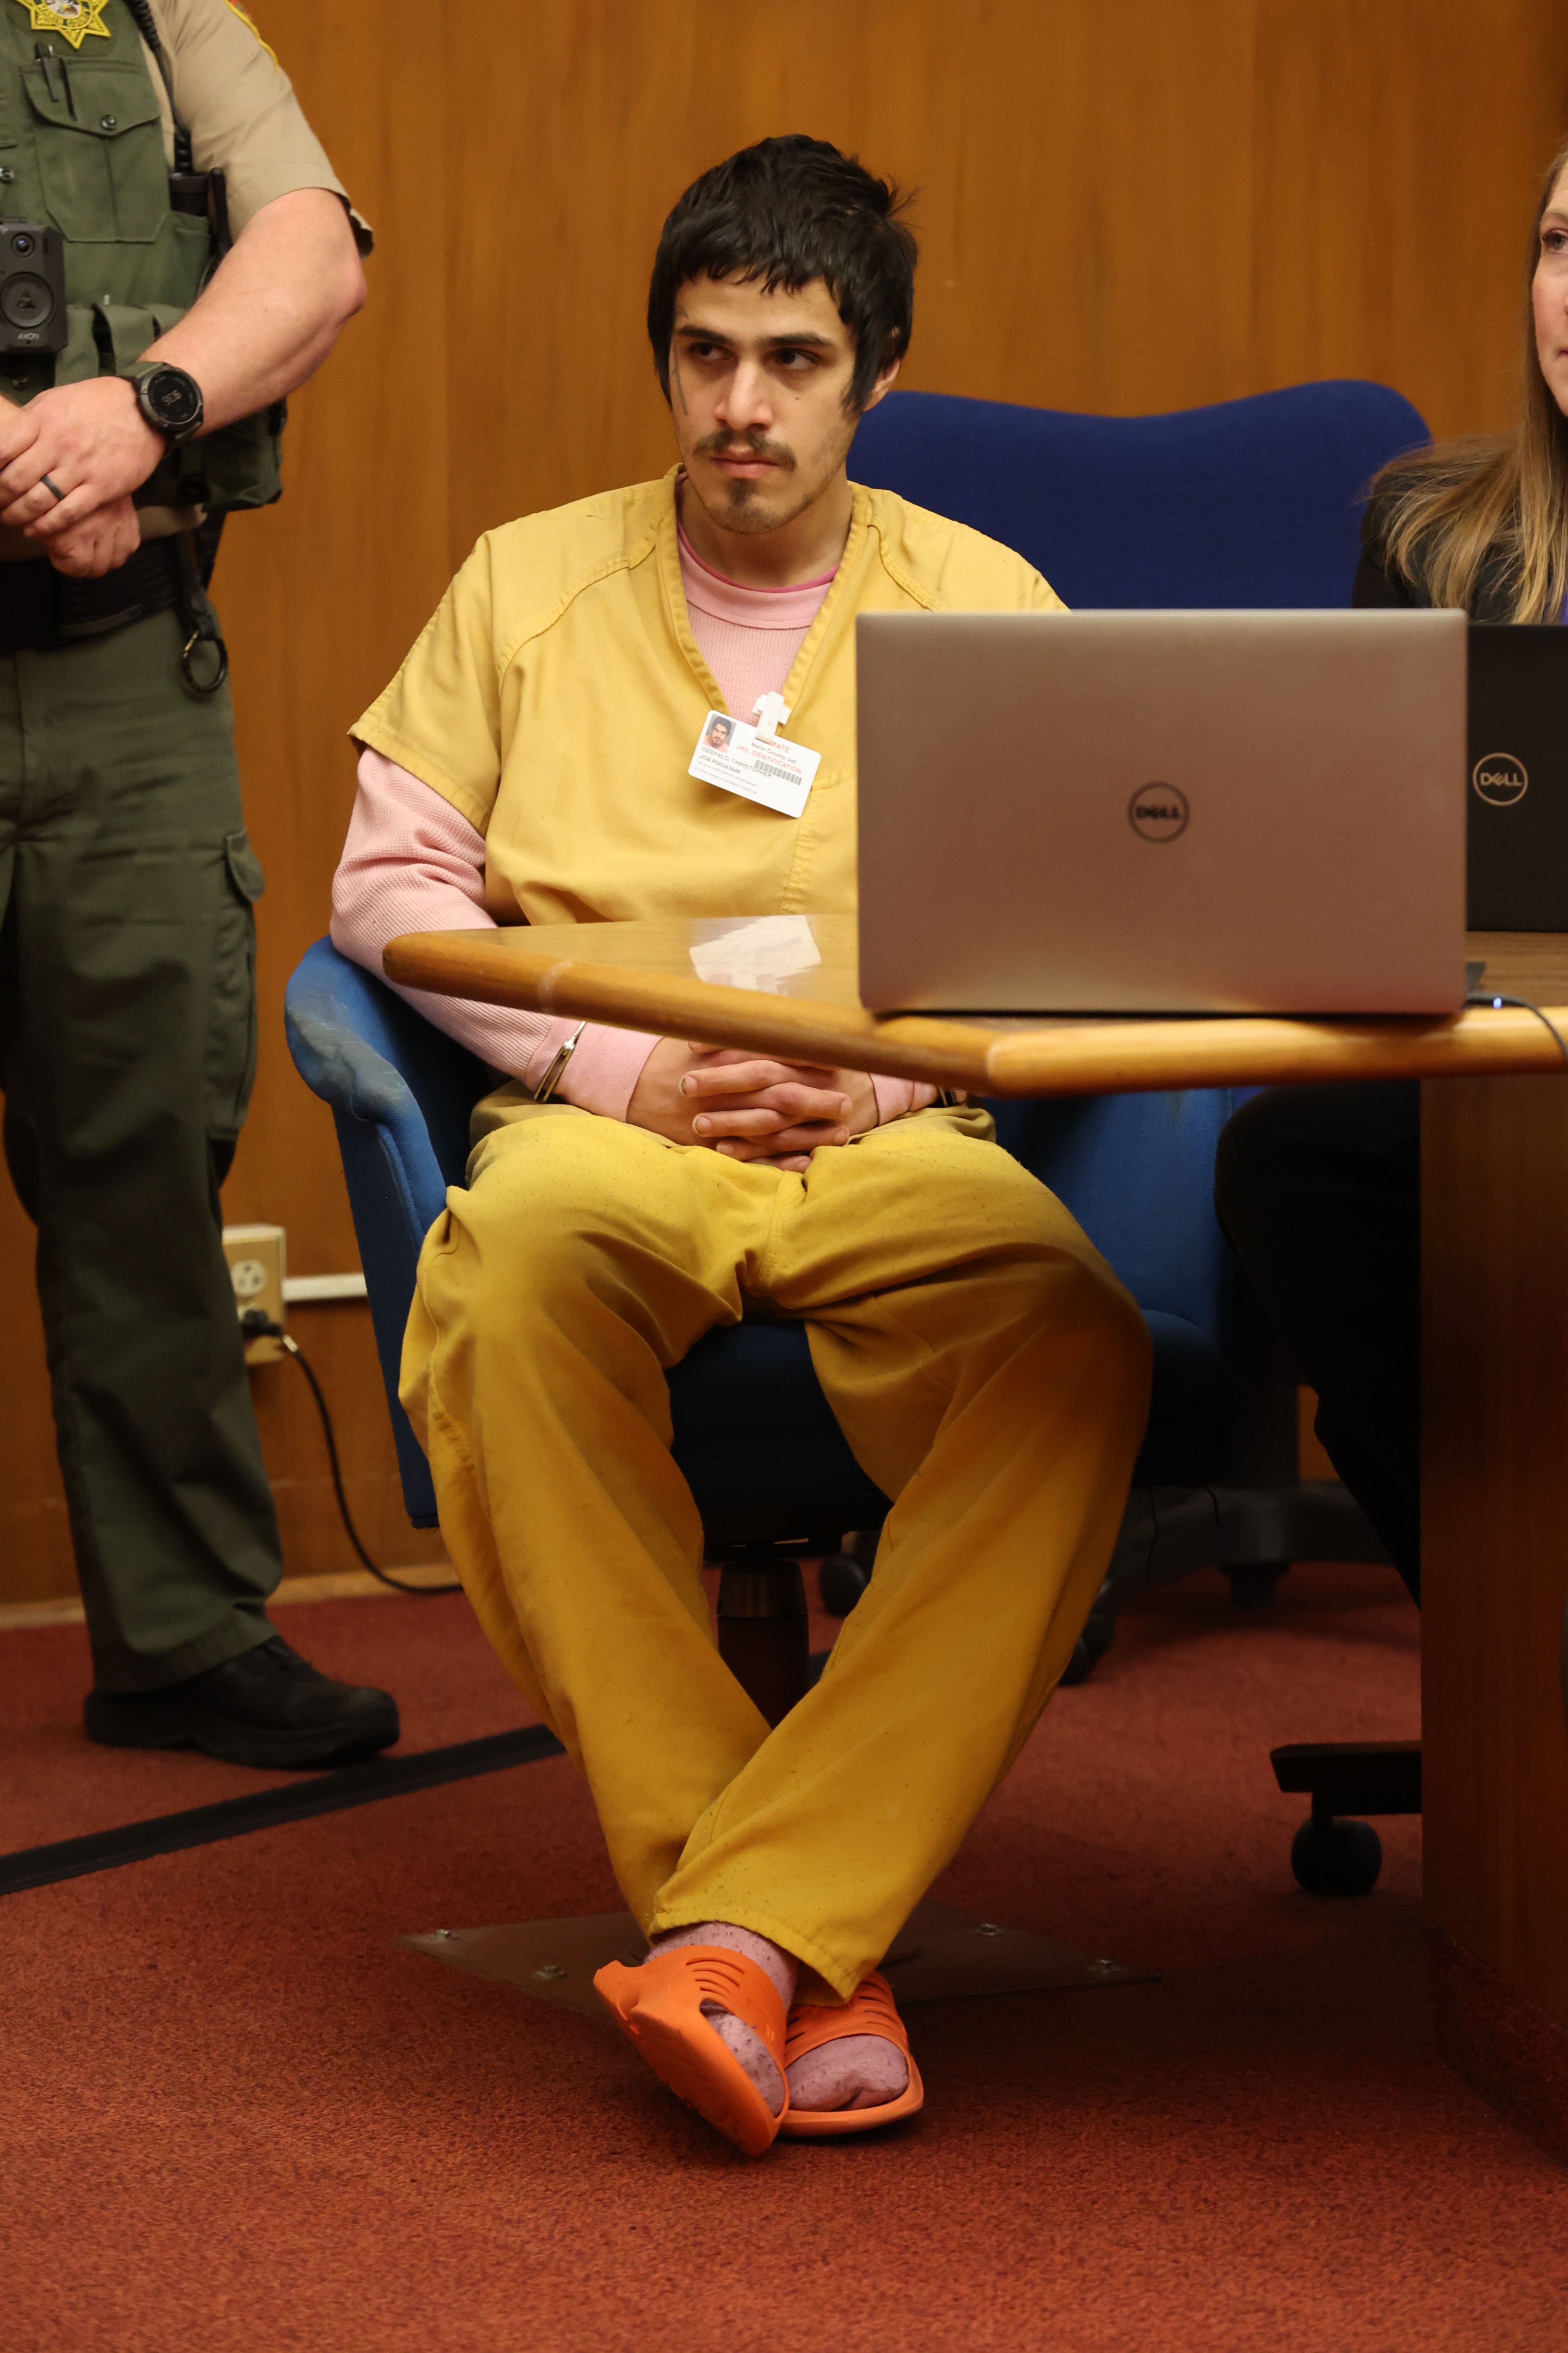 A man in a yellow prison uniform sits by a laptop, next to a woman and partially shown officer.